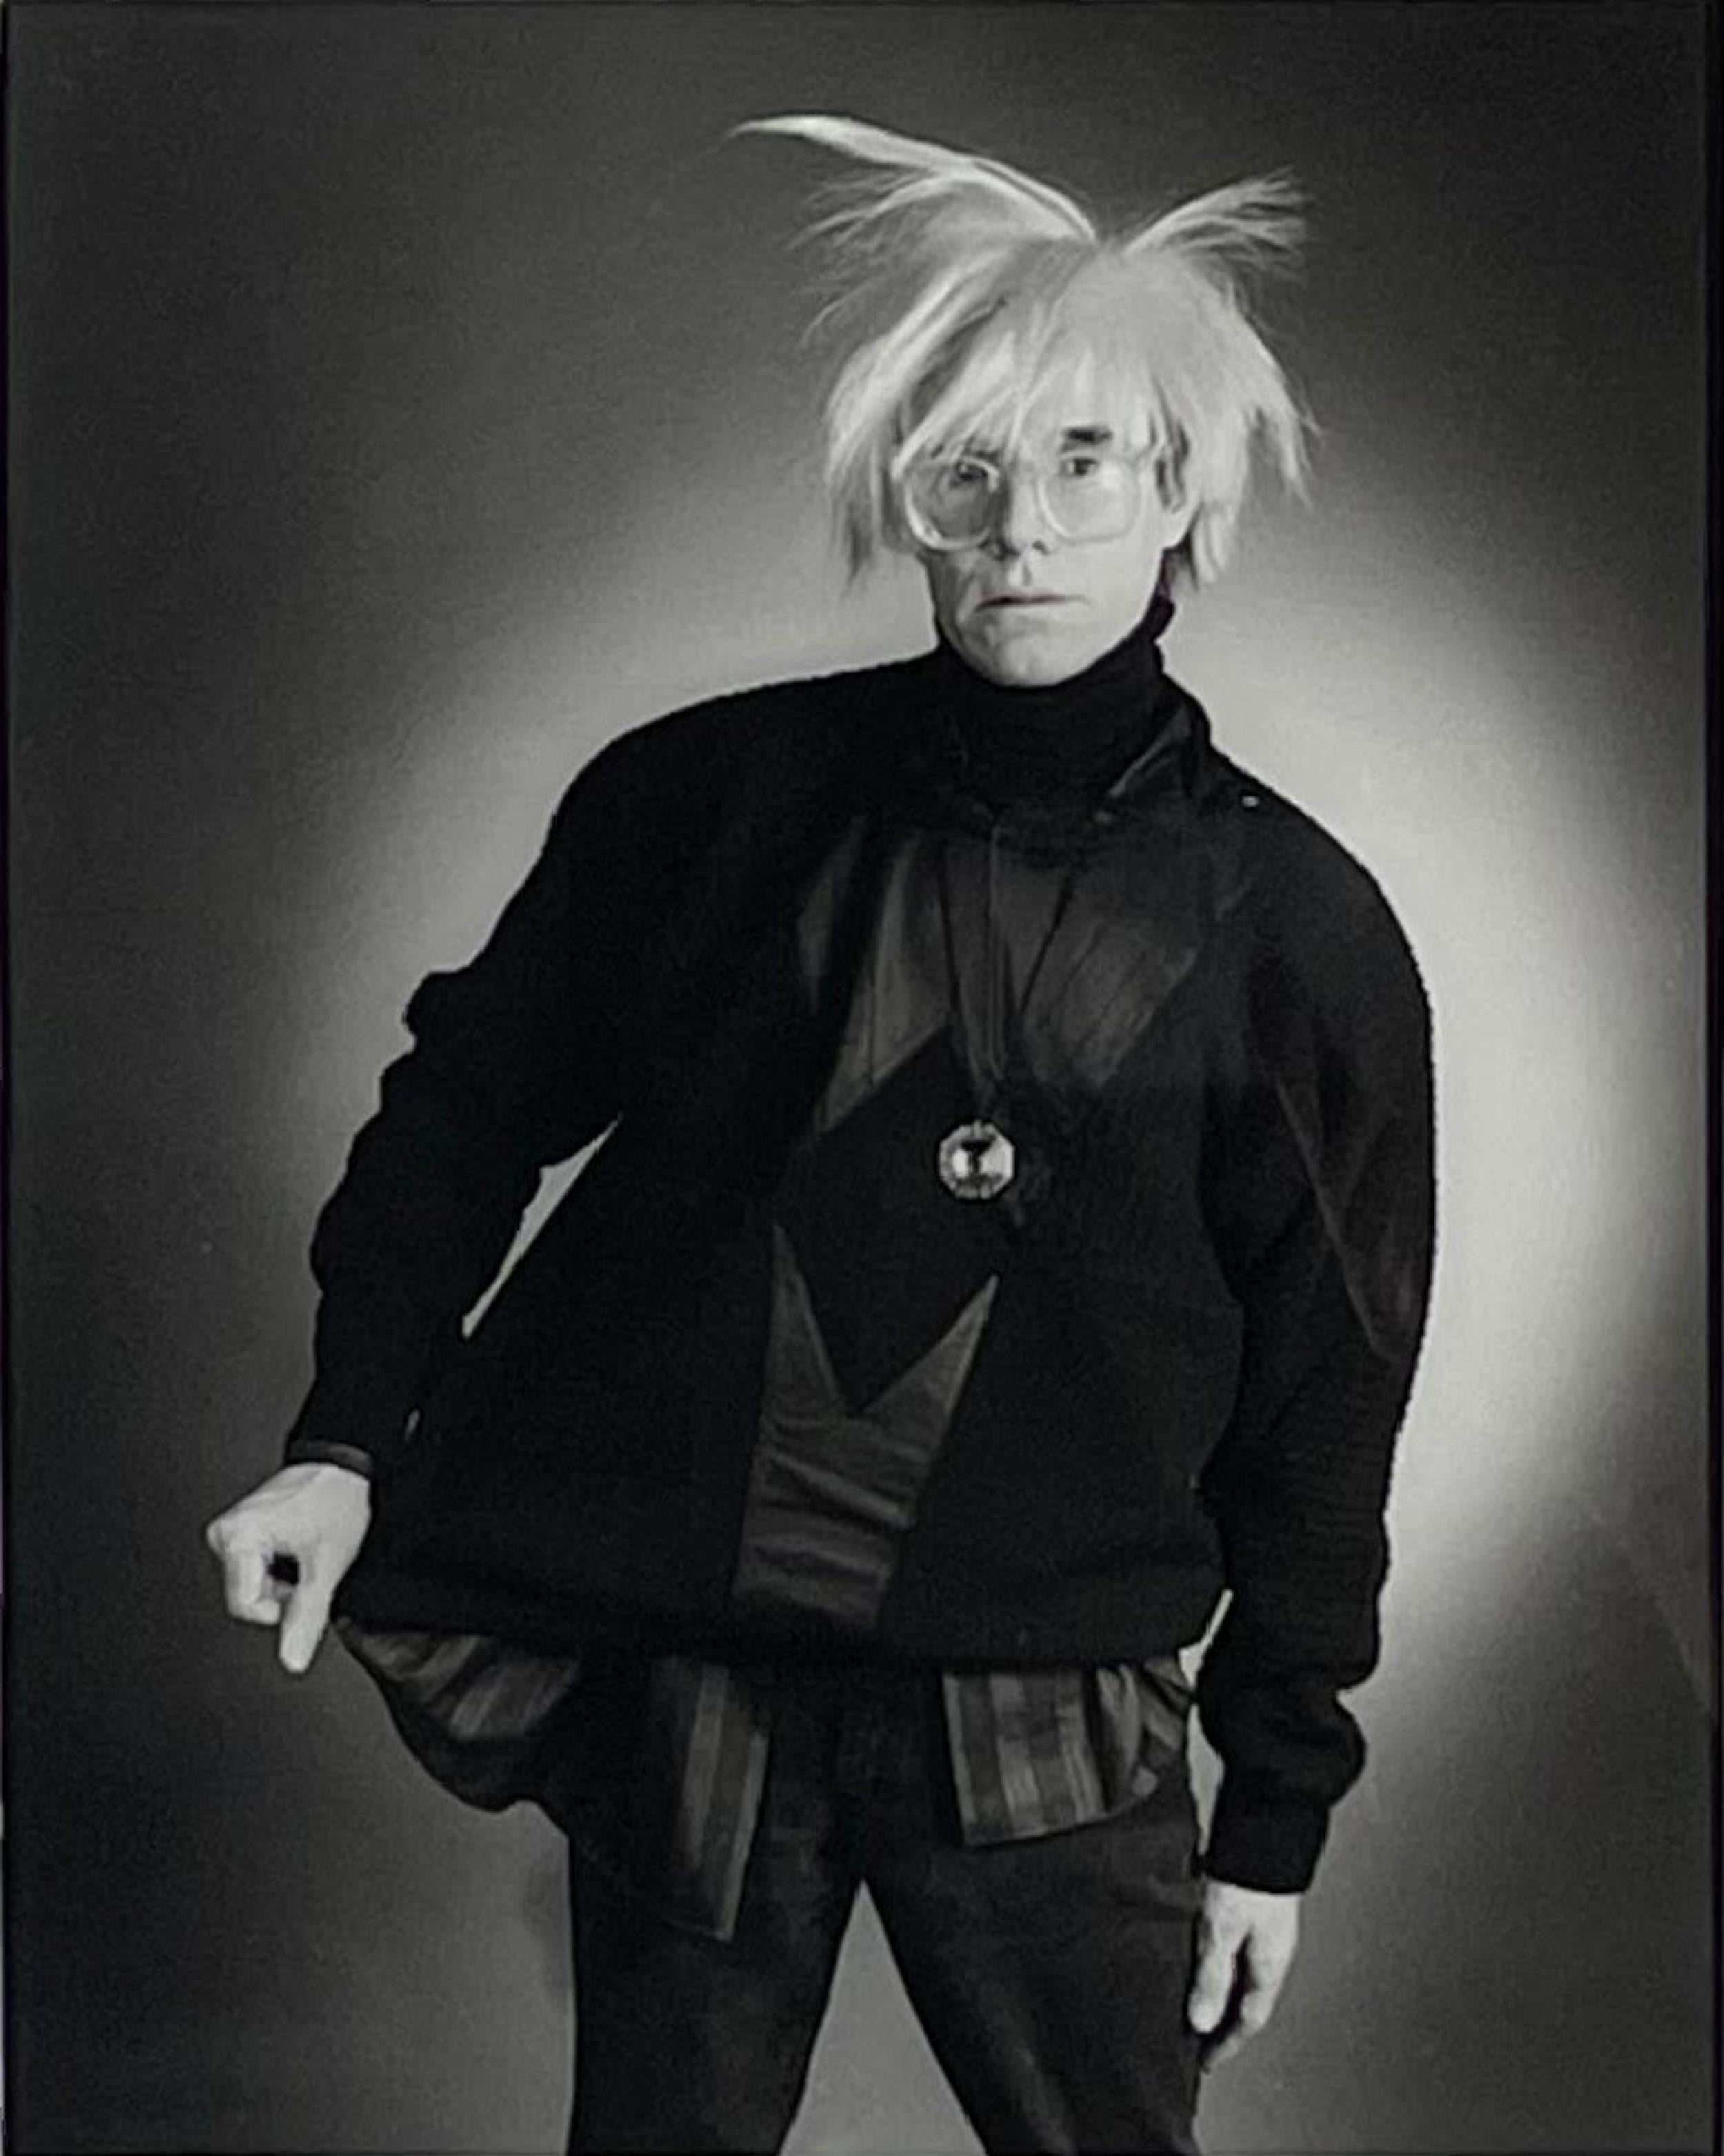 Portrait of Andy Warhol, hand signed by BOTH Andy Warhol and Christopher Makos